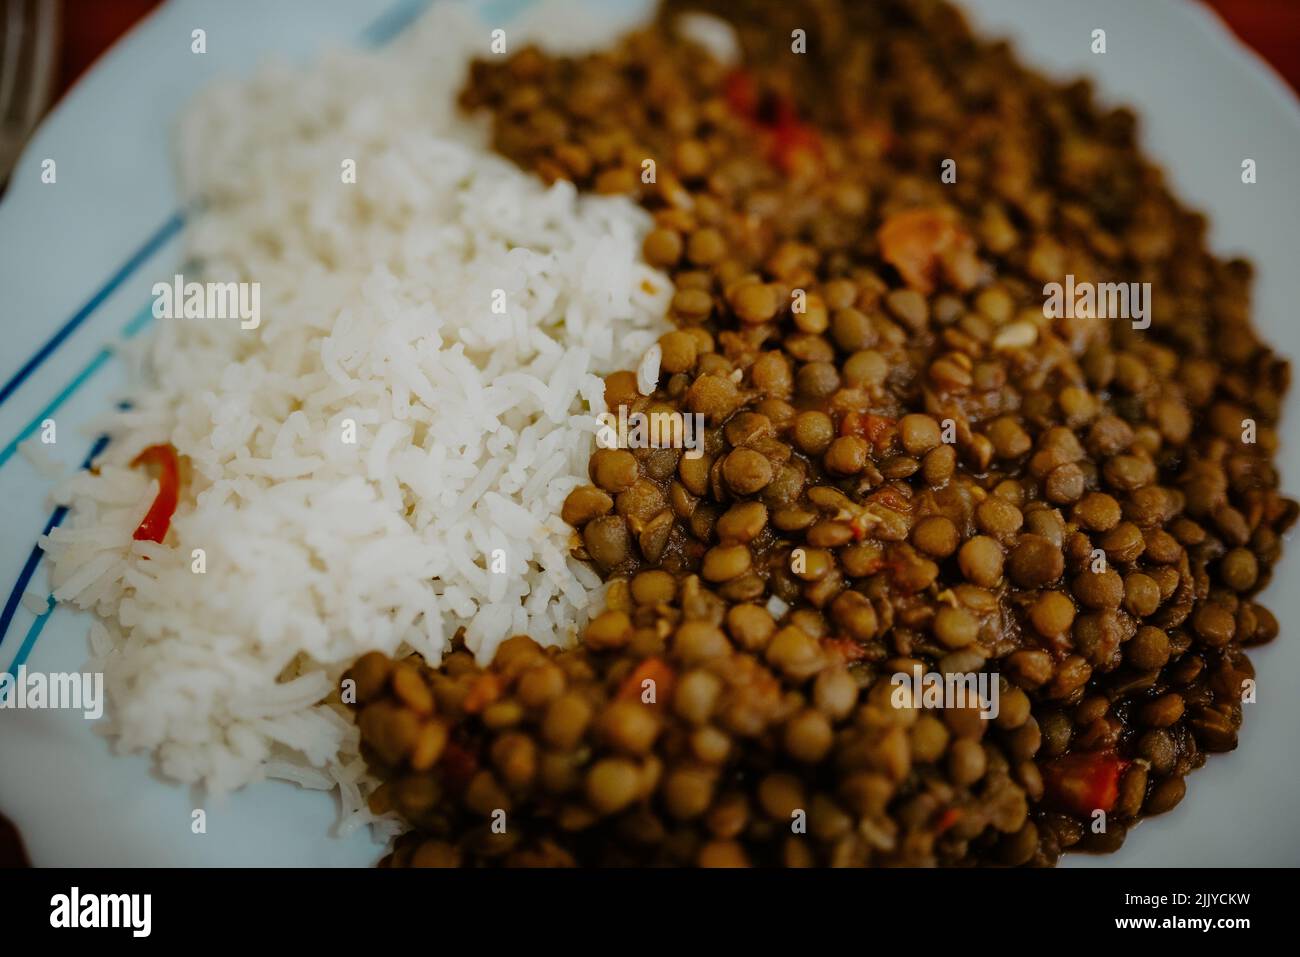 Lentils and rice, a typical African dish in Kenya. A source of carbohydrates and vitamins. Healthy African food Stock Photo